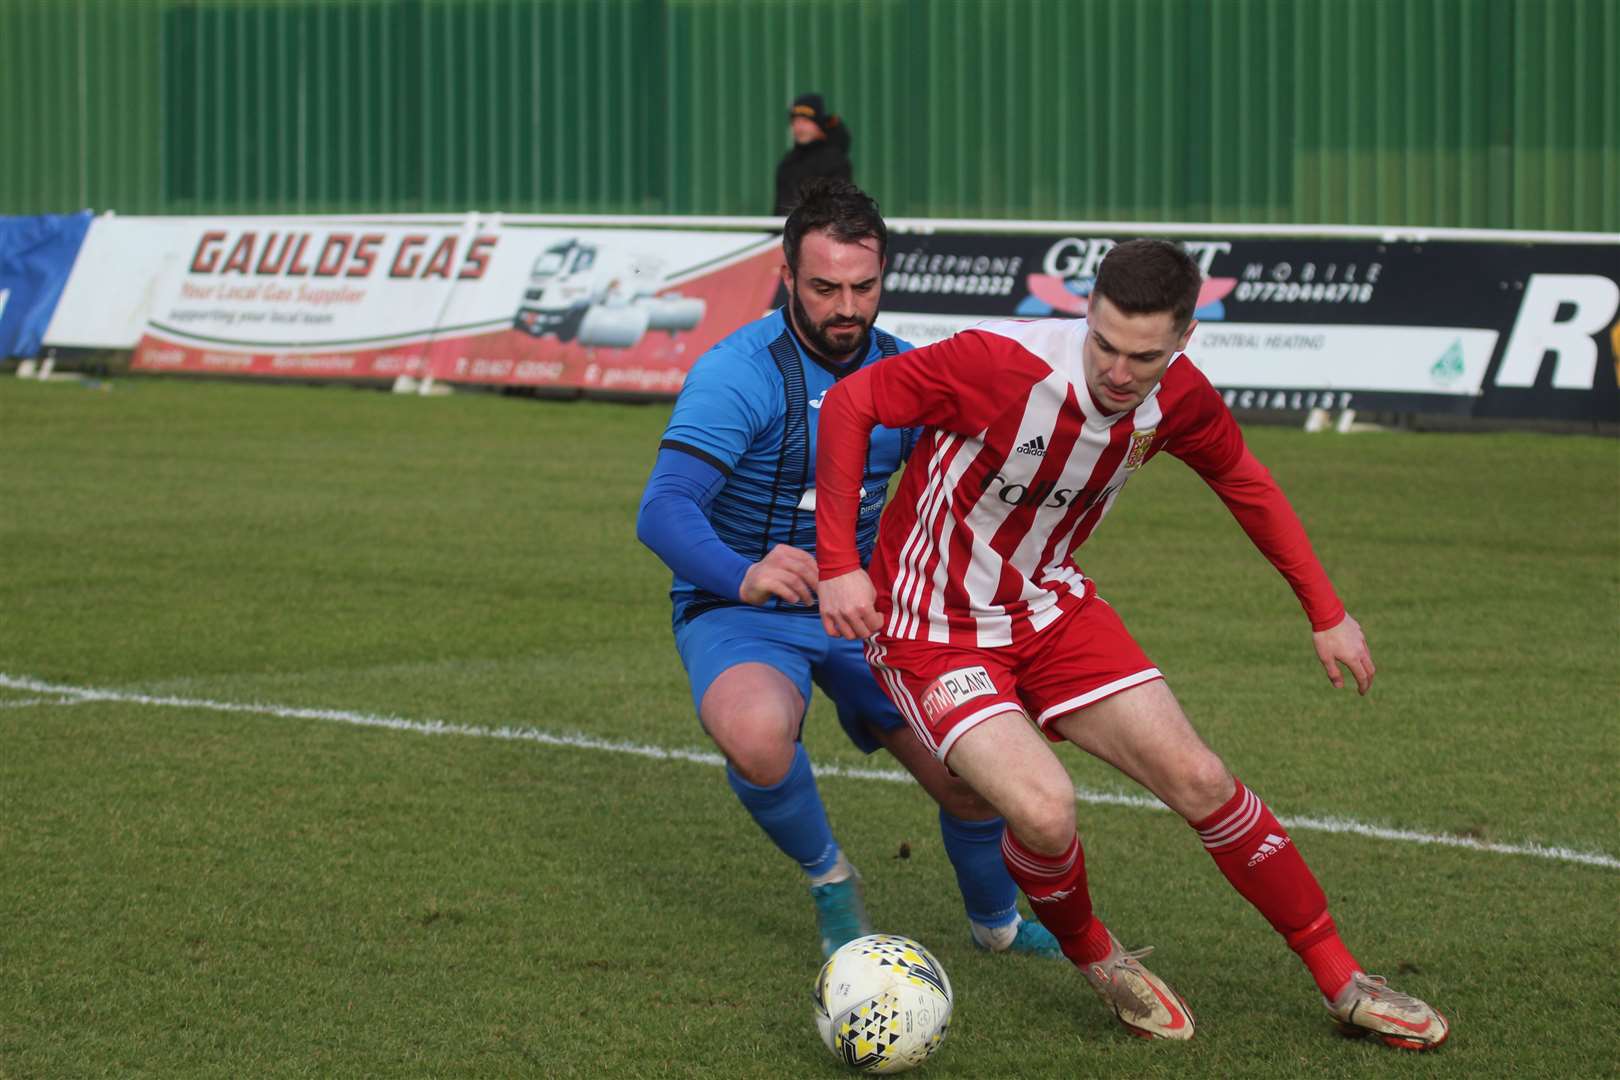 Formartine United captain Graeme Rodger returned to action after an injury earlier in the season. Picture: Kyle Ritchie